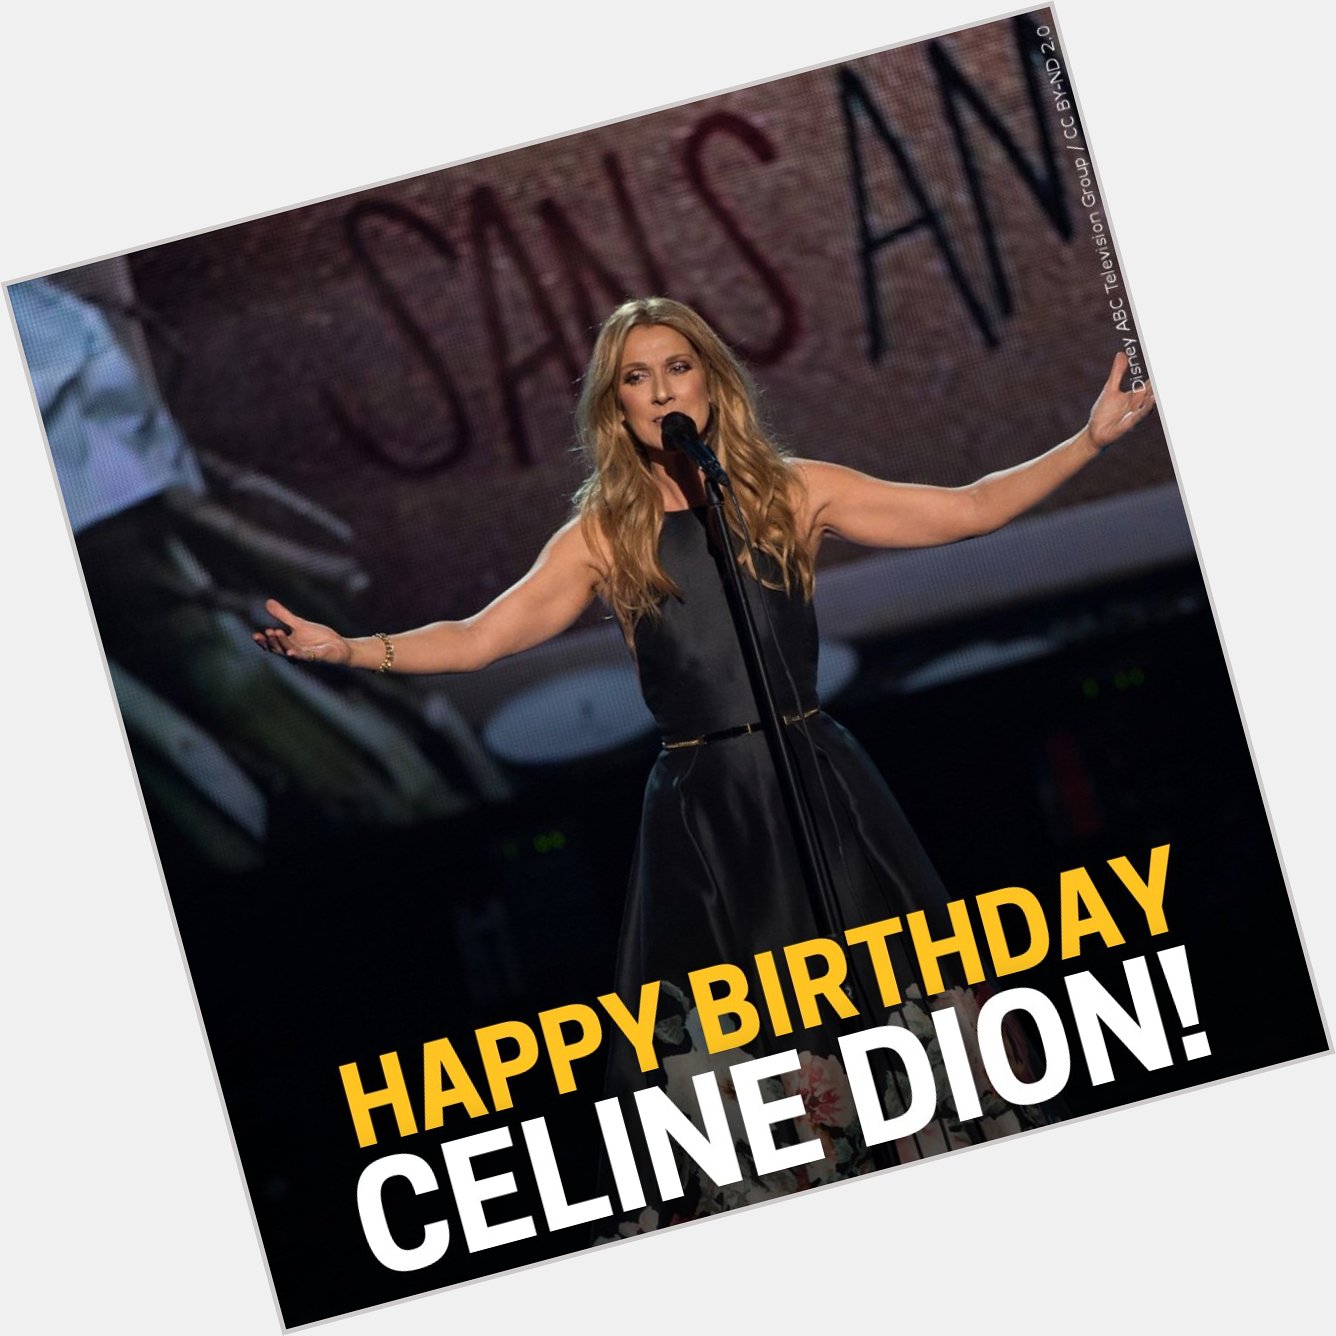 Happy birthday Celine Dion, she turns 55 today! 

What is your favorite Celine Dion song? 